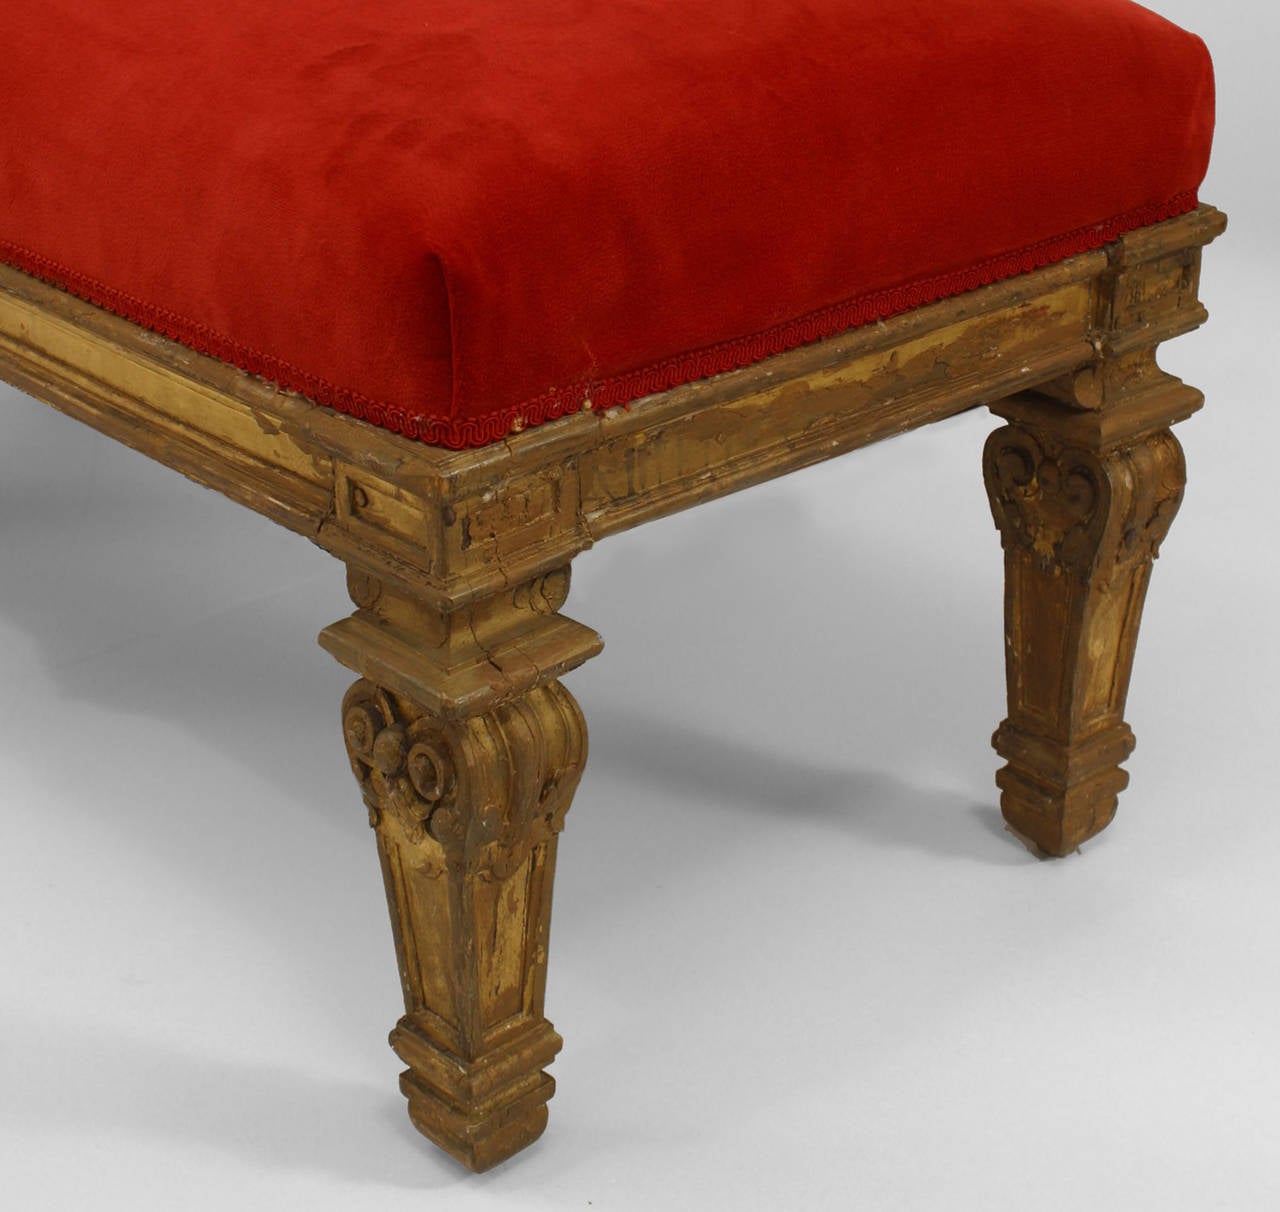 Pair of 19th century French Louis XIV style carved giltwood benches with six legs.
And a red velvet upholstered seat.